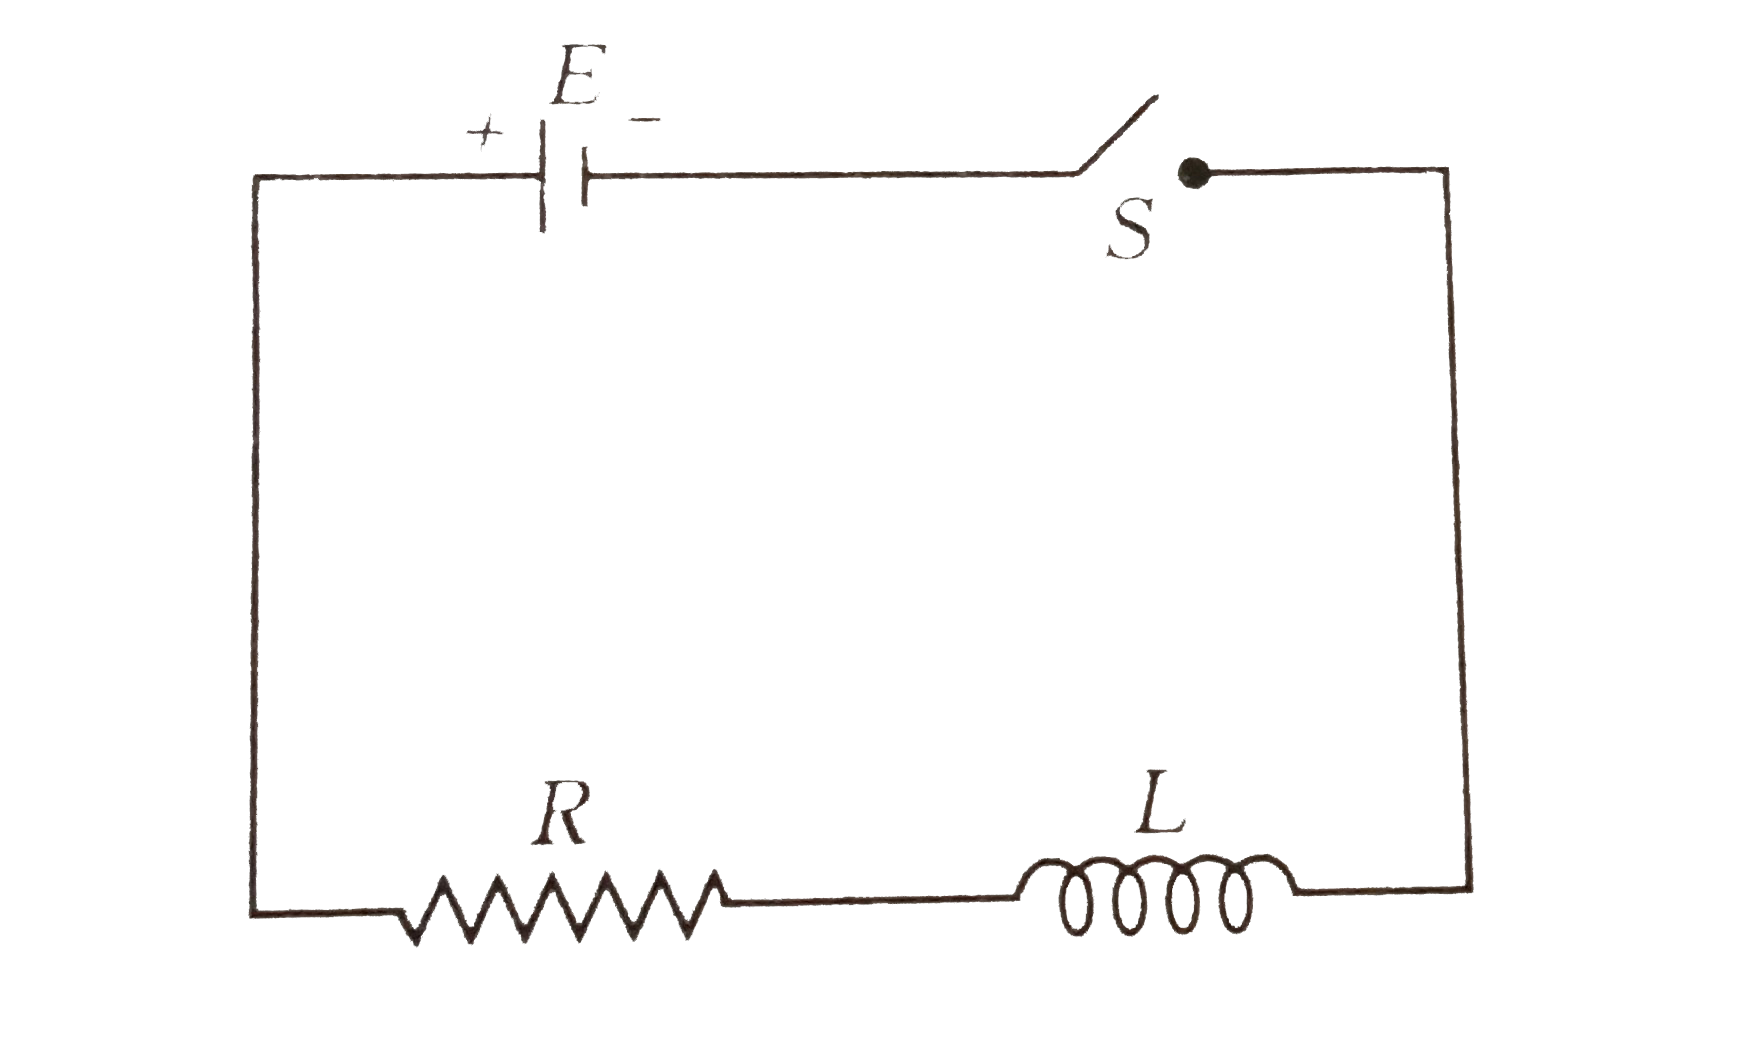 Switch S of the circuit shown in figure is closed at t = 0.      If emf in L is e and i is the current flowing through the circuit at time t, which of the following graphs is corrent?